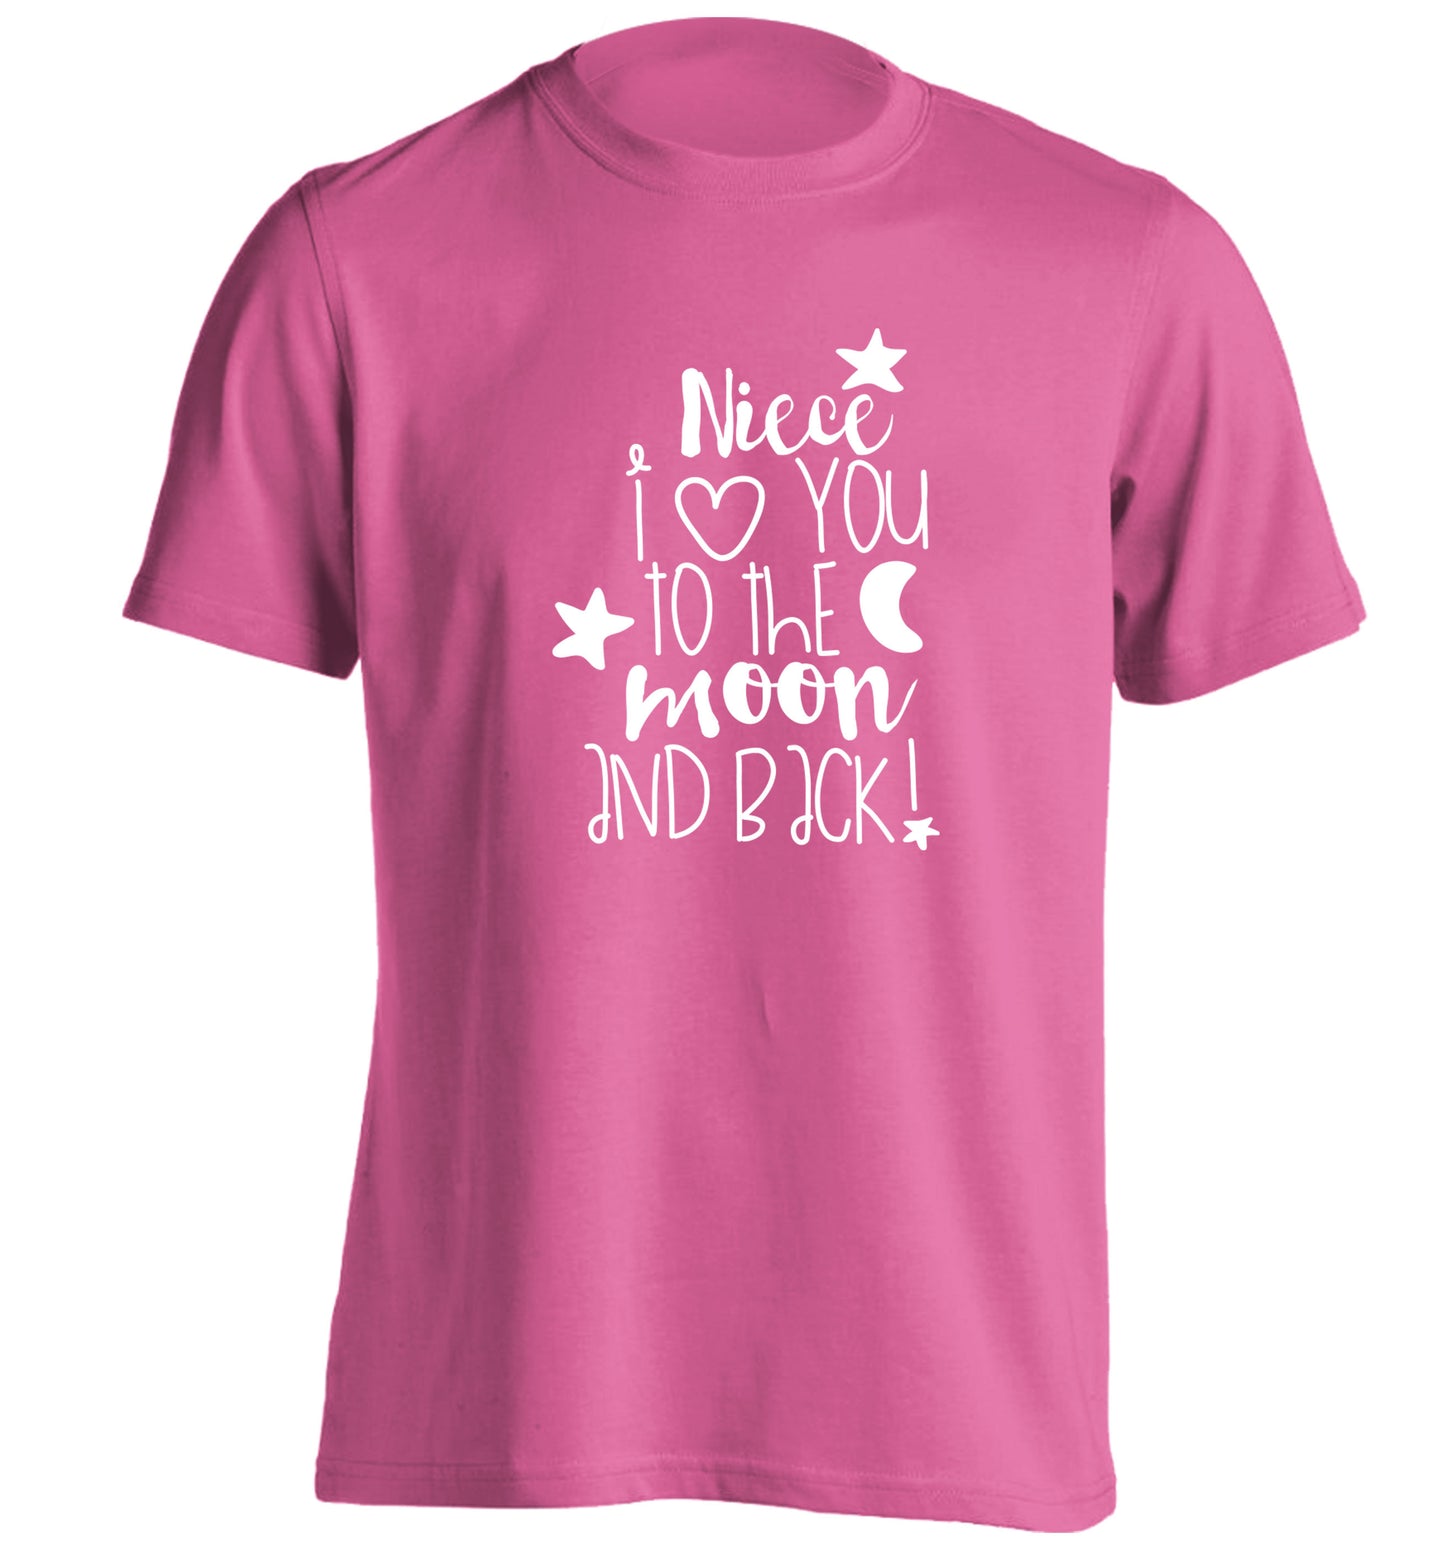 Niece I love you to the moon and back adults unisex pink Tshirt 2XL